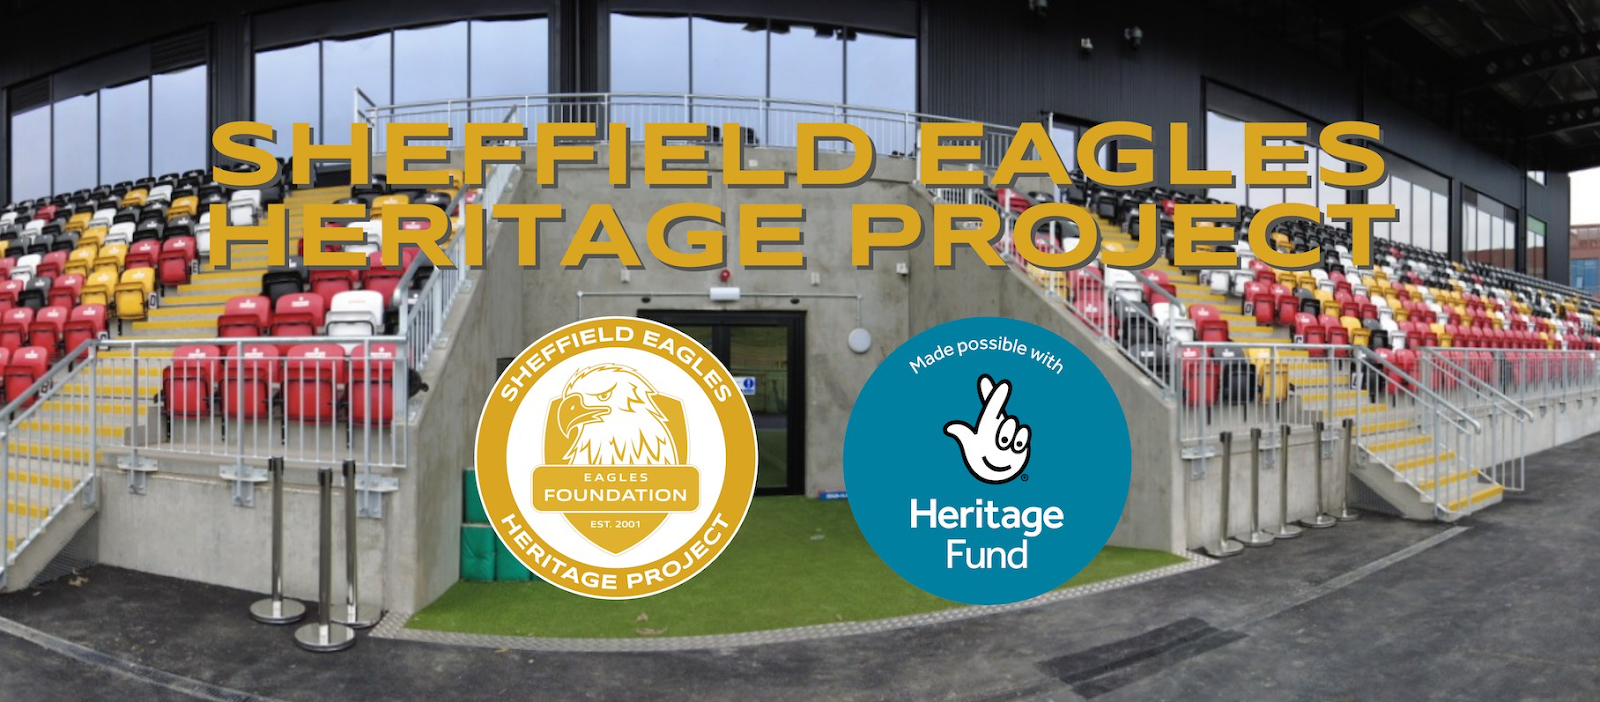 Sheffield Eagles Heritage Project in partnership with the National Lottery Heritage Fund